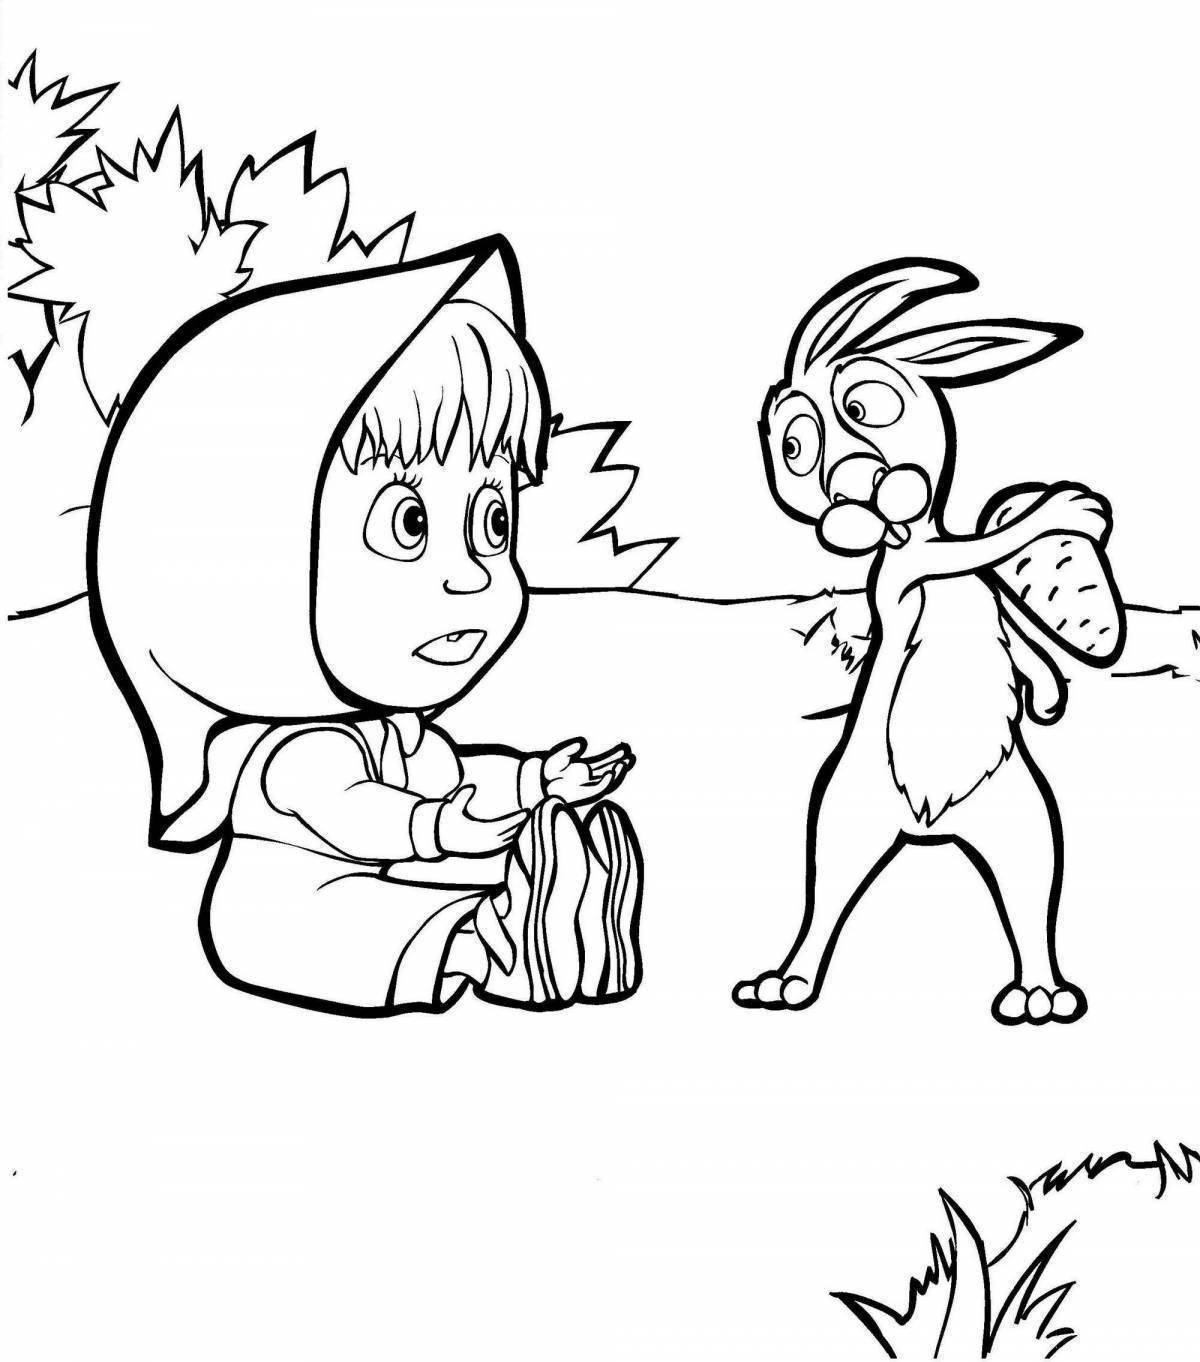 Adorable Masha and the Bear coloring pages for kids